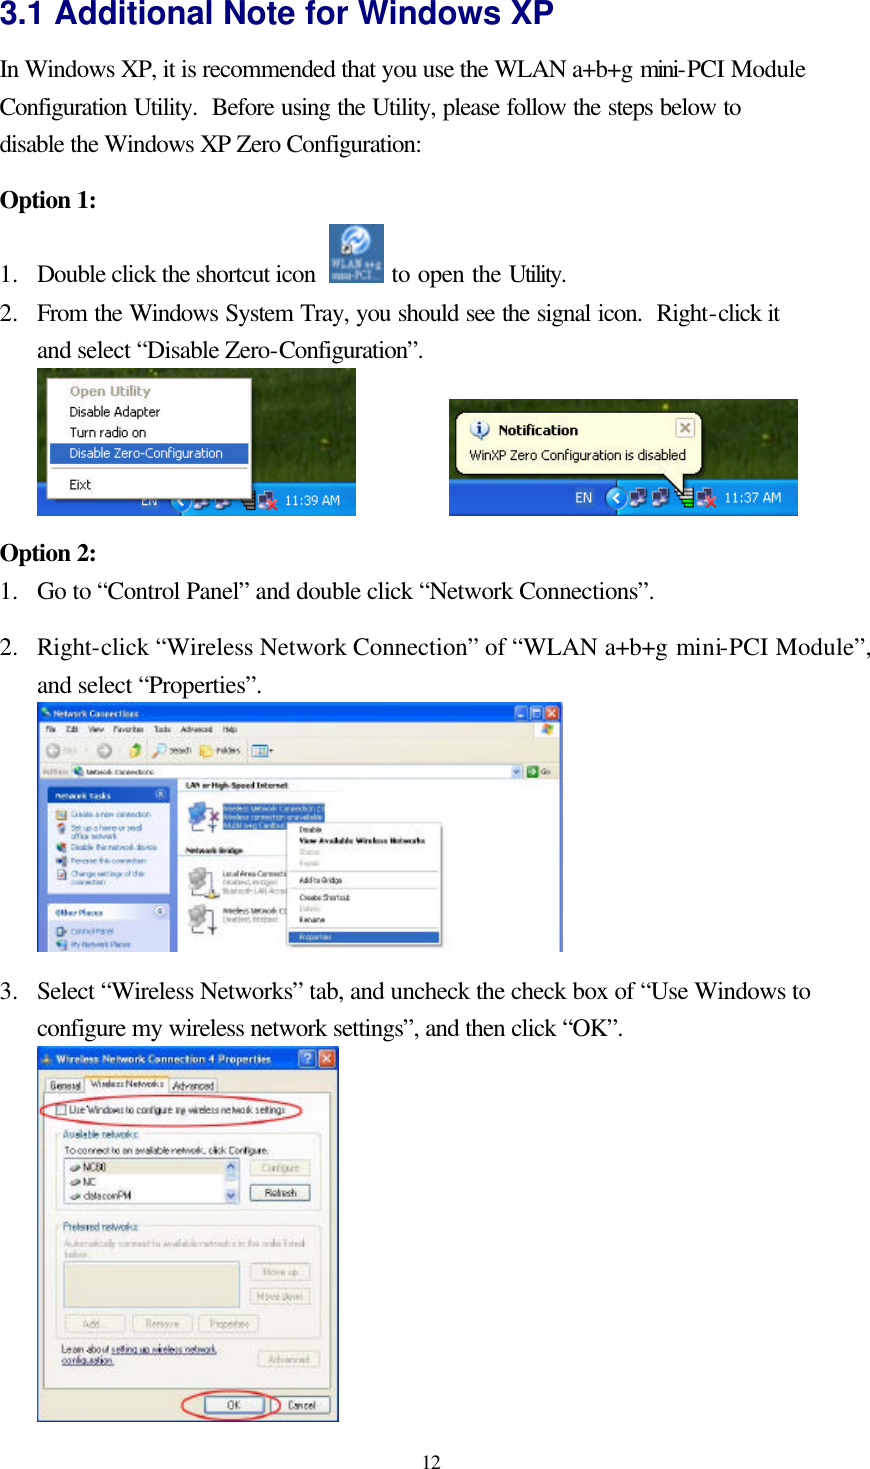  12 3.1 Additional Note for Windows XP   In Windows XP, it is recommended that you use the WLAN a+b+g mini-PCI Module Configuration Utility.  Before using the Utility, please follow the steps below to disable the Windows XP Zero Configuration:  Option 1: 1.  Double click the shortcut icon   to open the Utility. 2.  From the Windows System Tray, you should see the signal icon.  Right-click it and select “Disable Zero-Configuration”.      Option 2: 1.  Go to “Control Panel” and double click “Network Connections”.  2.  Right-click “Wireless Network Connection” of “WLAN a+b+g mini-PCI Module”, and select “Properties”.   3.  Select “Wireless Networks” tab, and uncheck the check box of “Use Windows to configure my wireless network settings”, and then click “OK”.  